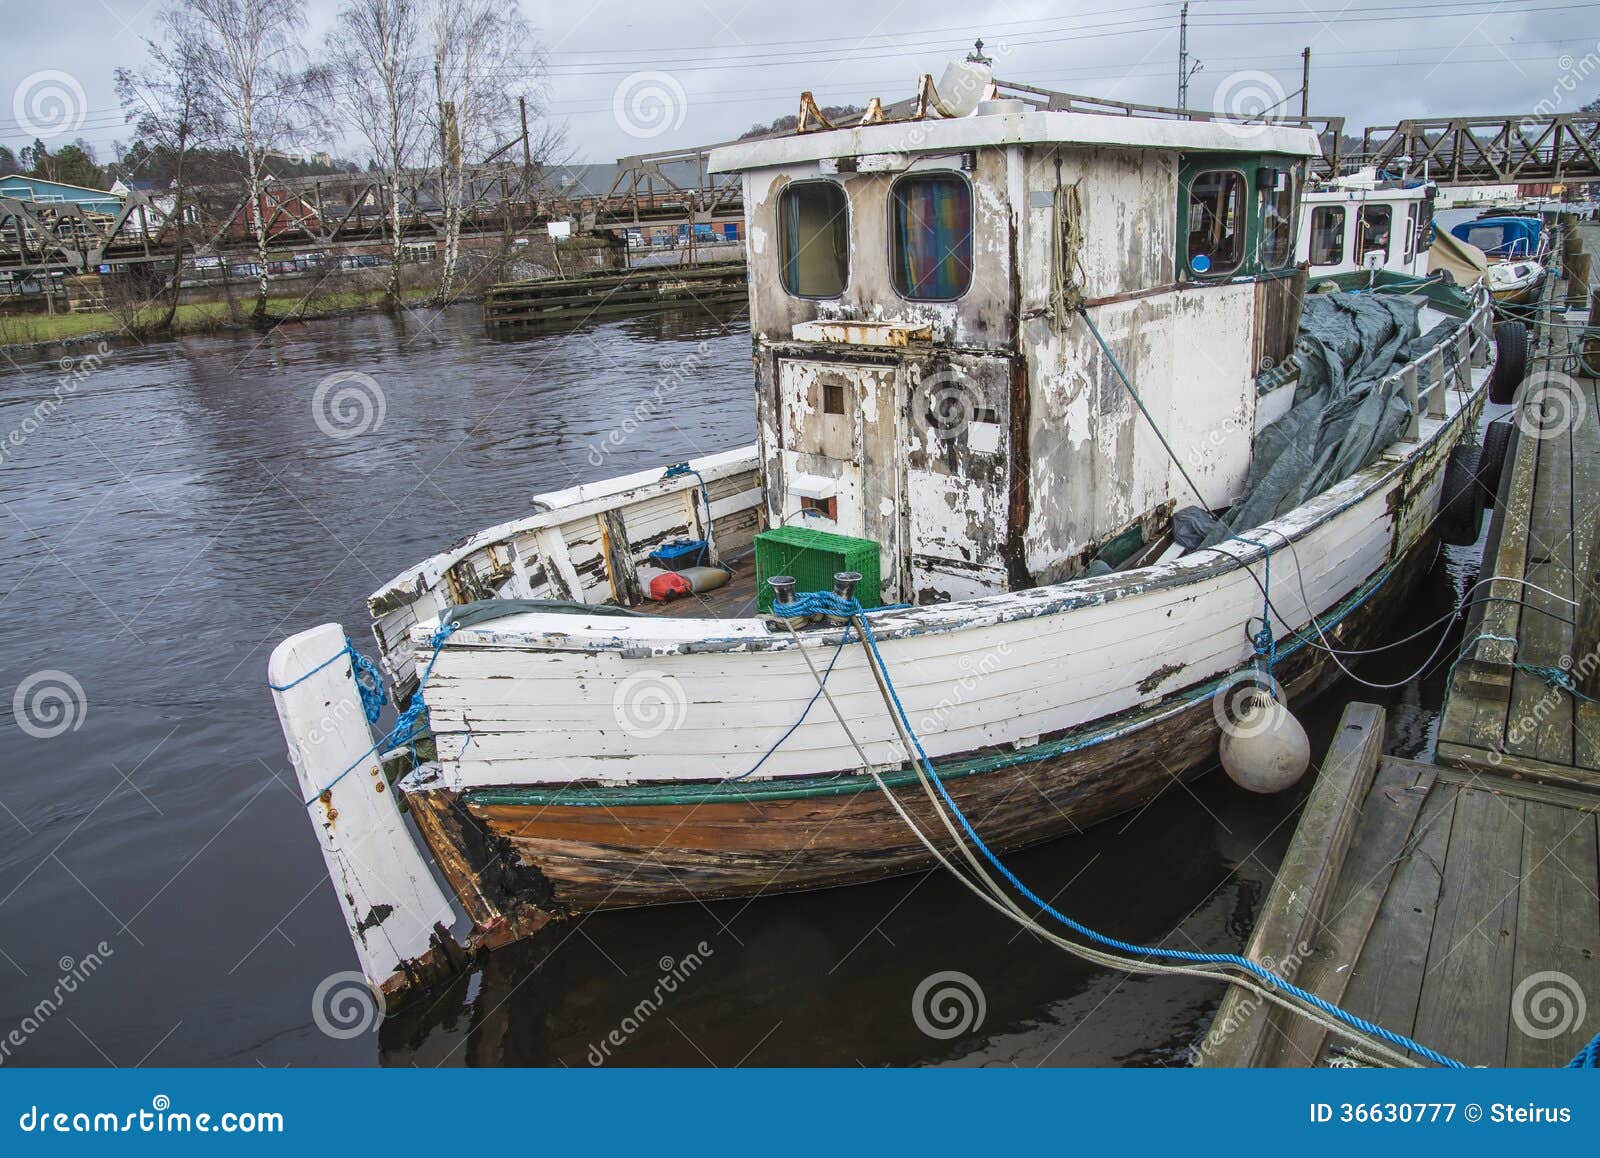 The boat is built of wood and is in dire need to maintenance, repair 